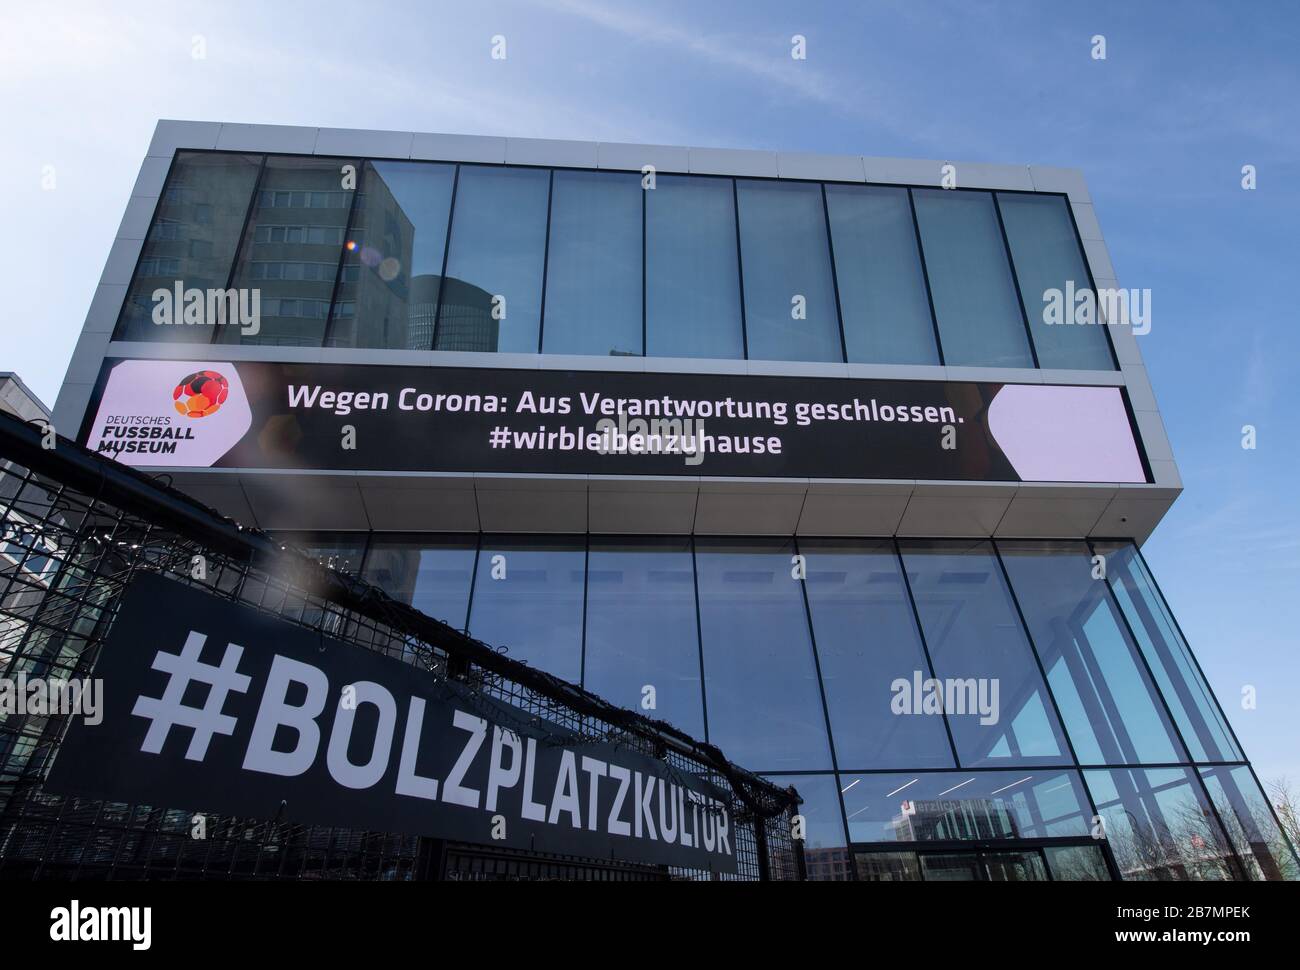 Dortmund, Germany. 17th Mar, 2020. The German Football Museum of the DFB writes on its LED band on the facade 'Wegen Corona: Aus Verantwortung geschlossen. #we stay at home '. Credit: Bernd Thissen/dpa/Alamy Live News Stock Photo